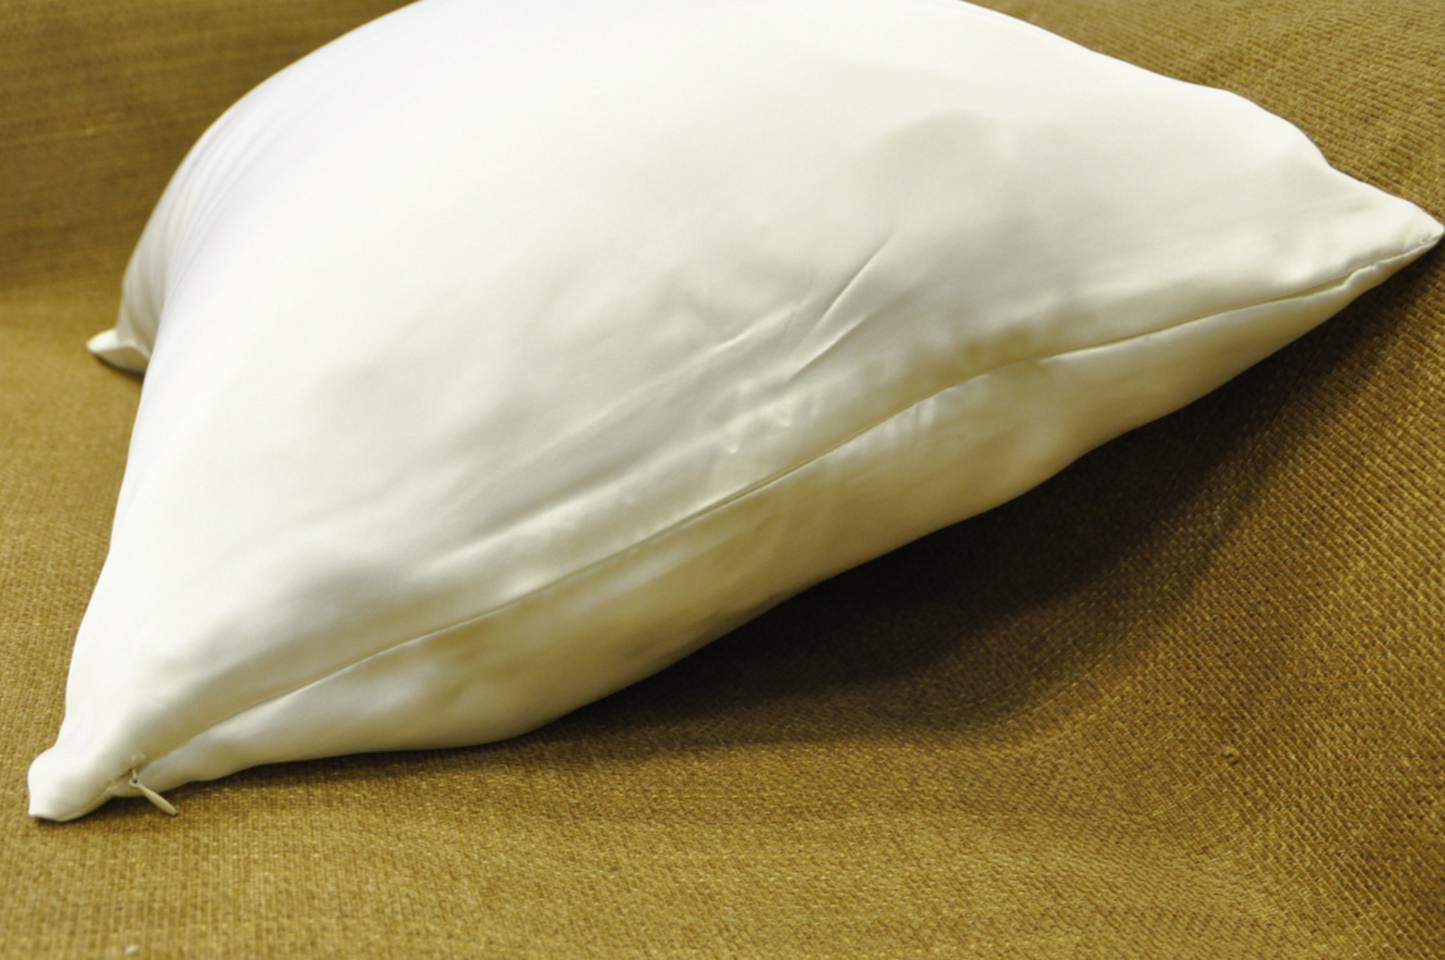 Silk Pillows | True White | Exclusive Silk Collection | Skilled Accents